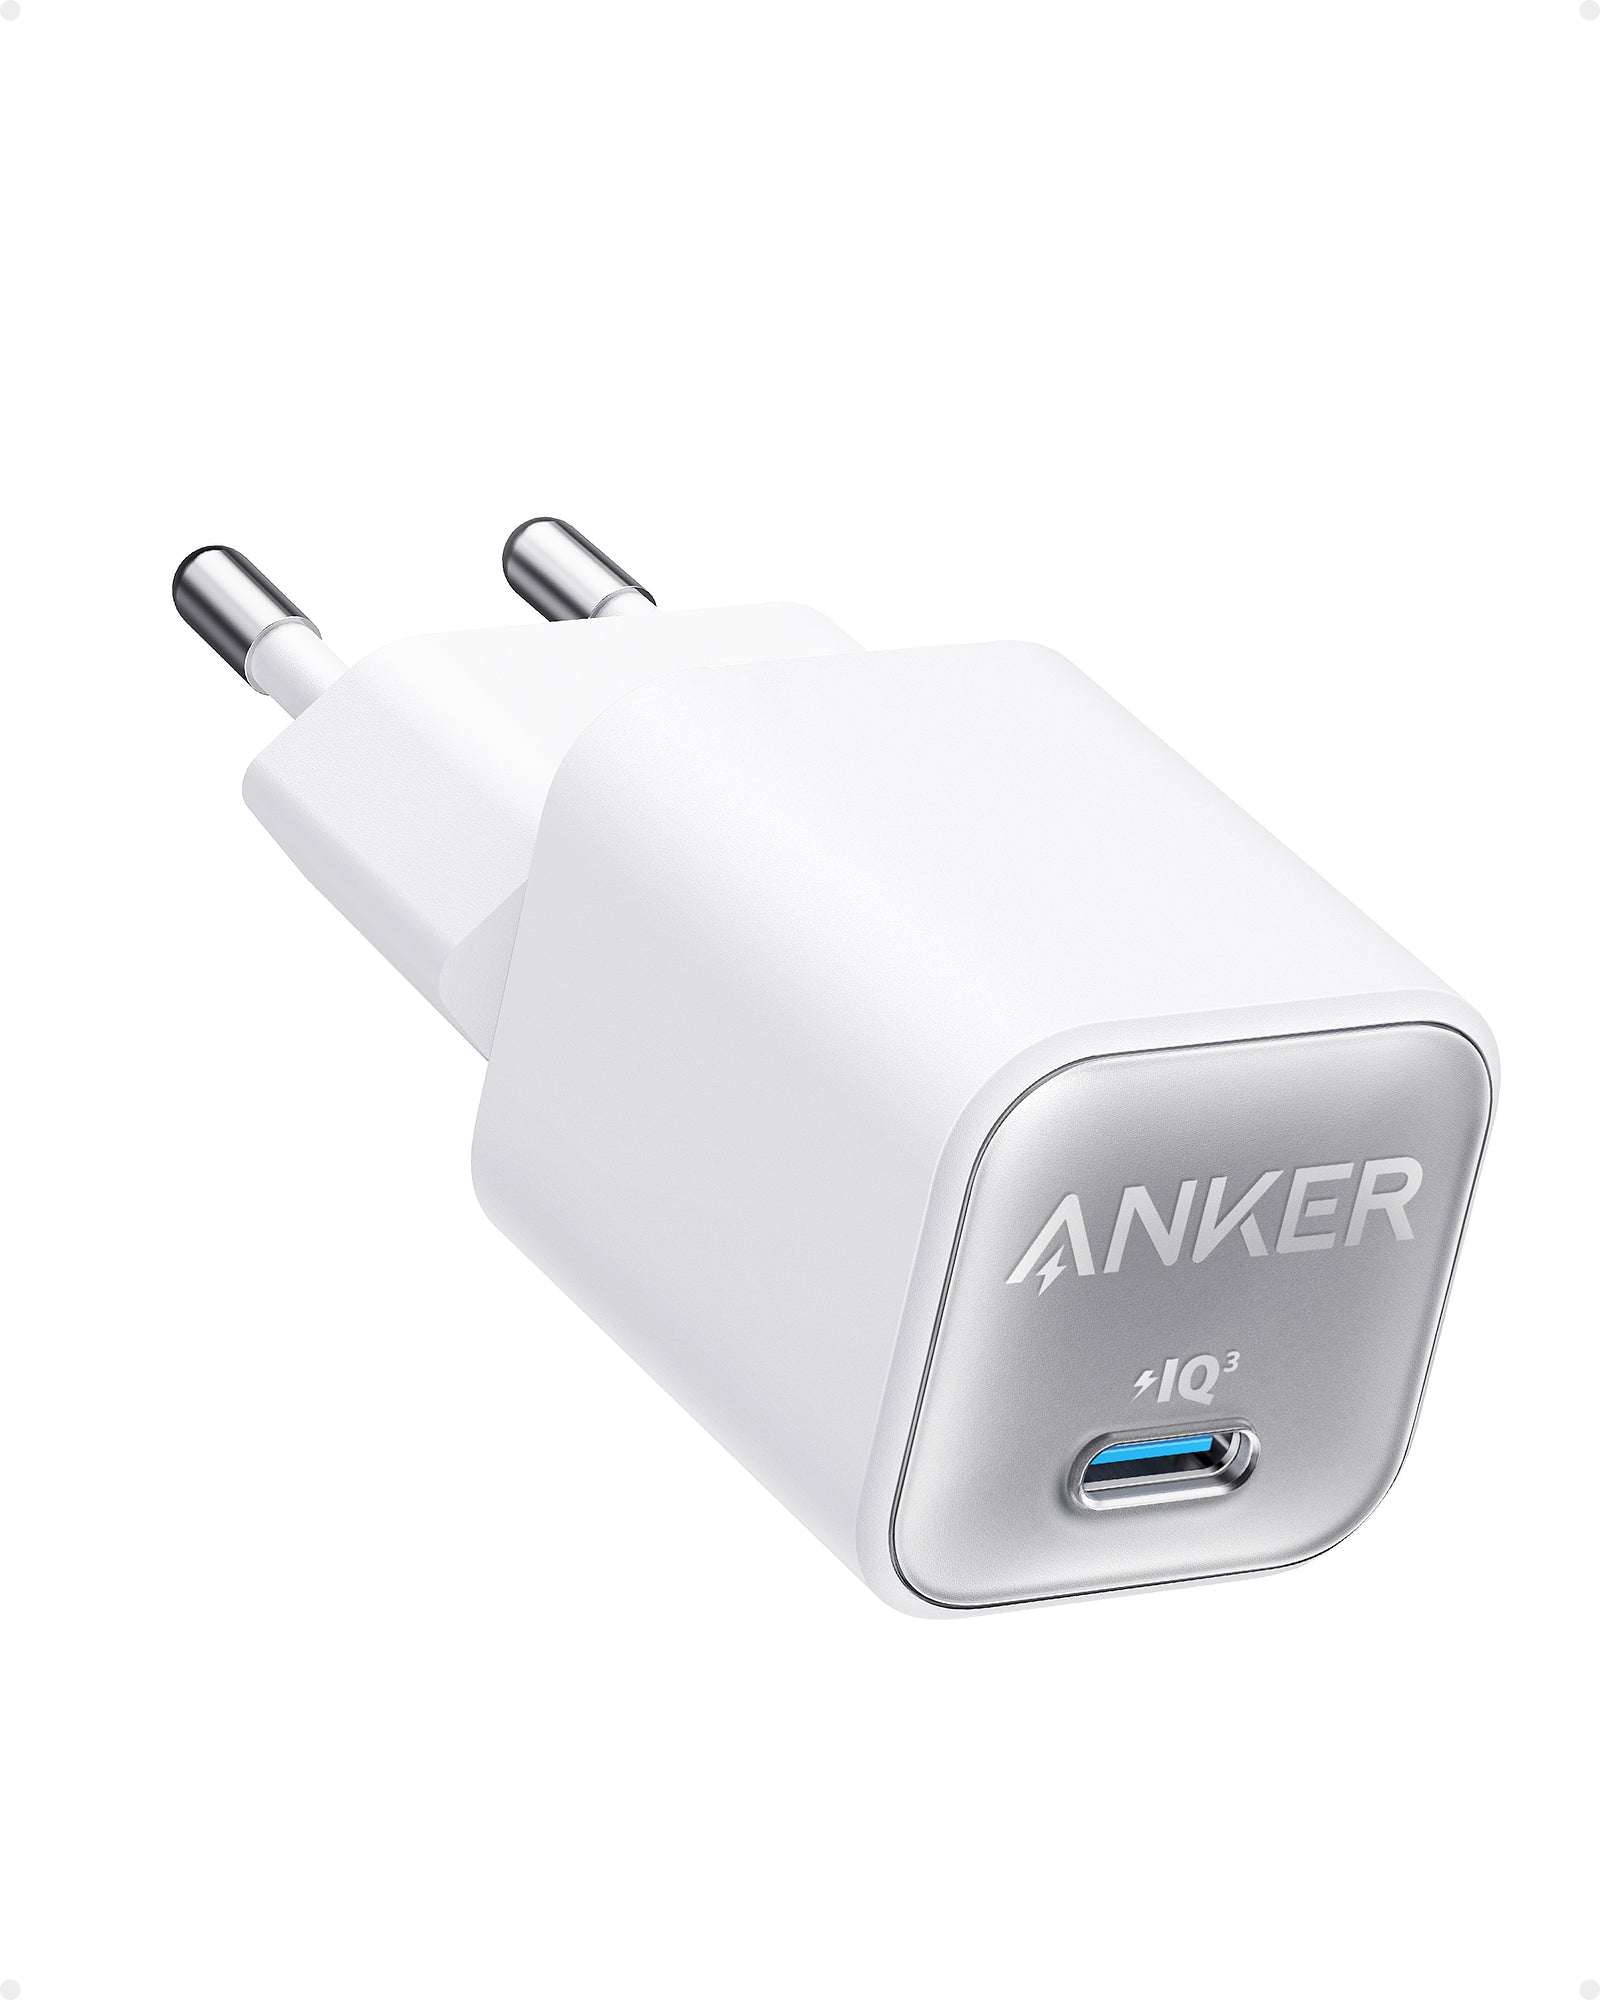 Anker Charger 3, 30W) - Anker Europe